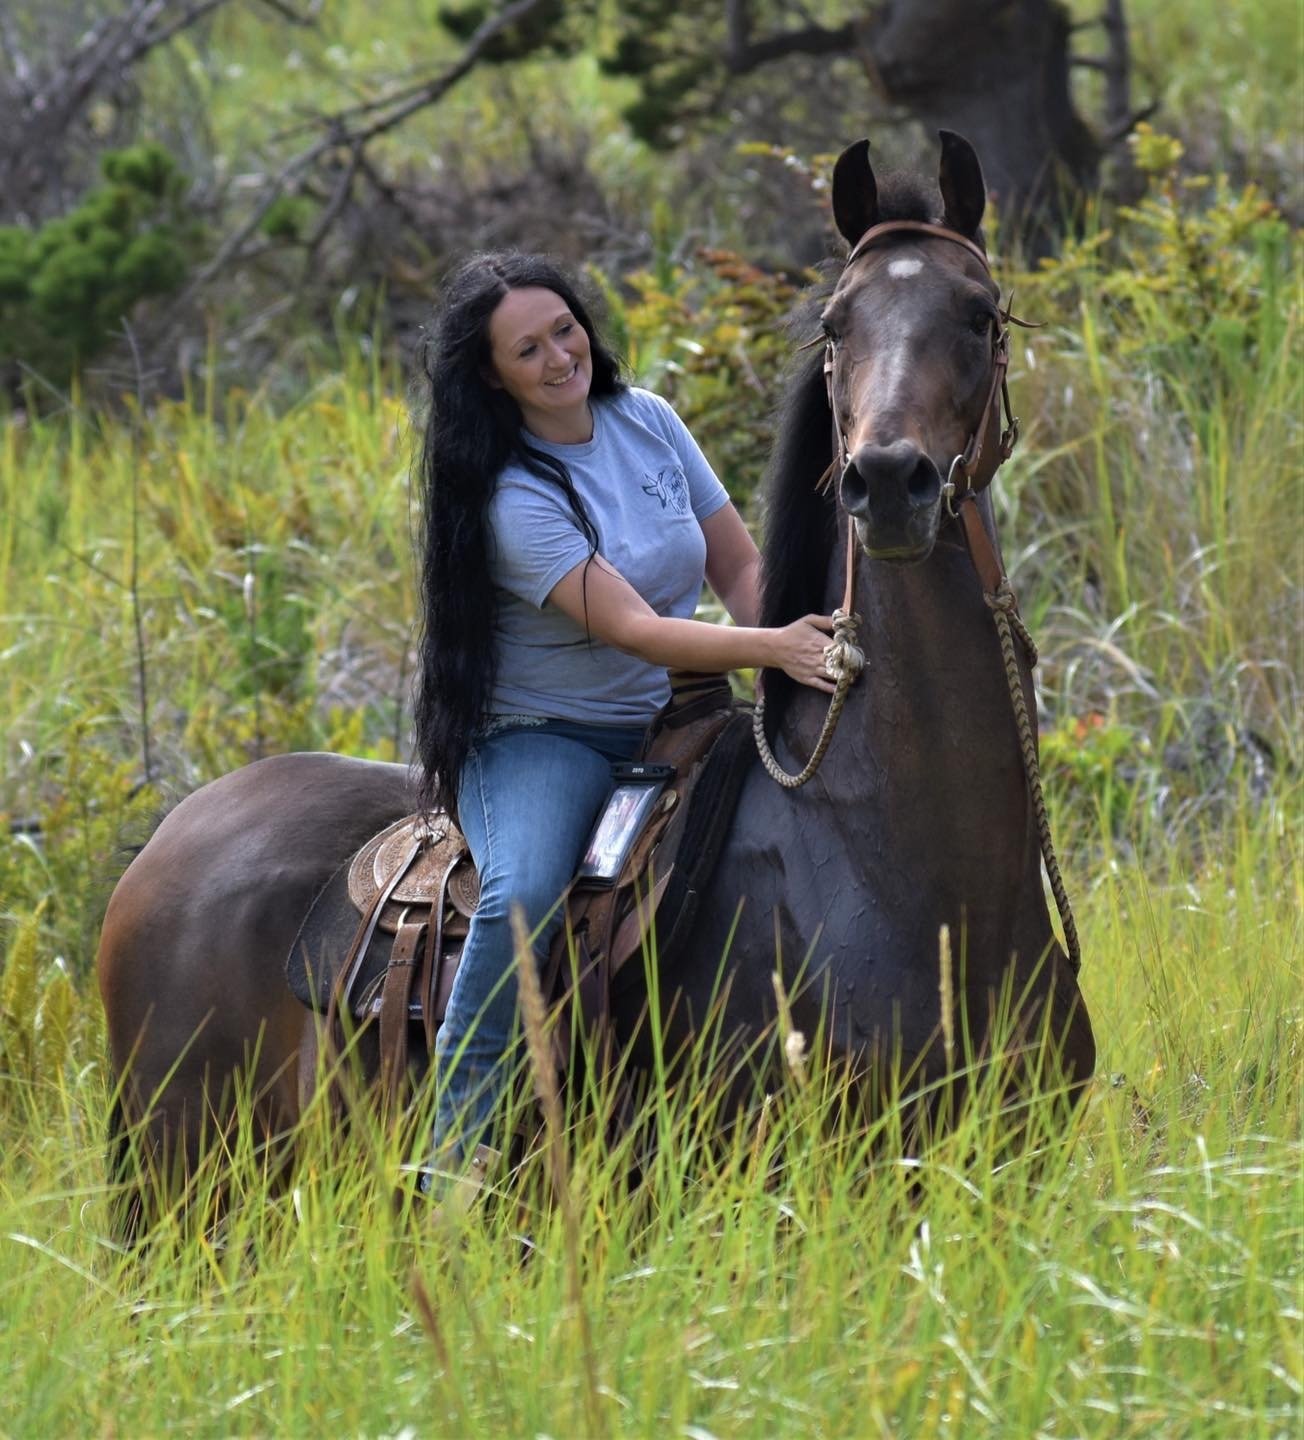 Erica Trager is pictured riding Biggs, a gelding.